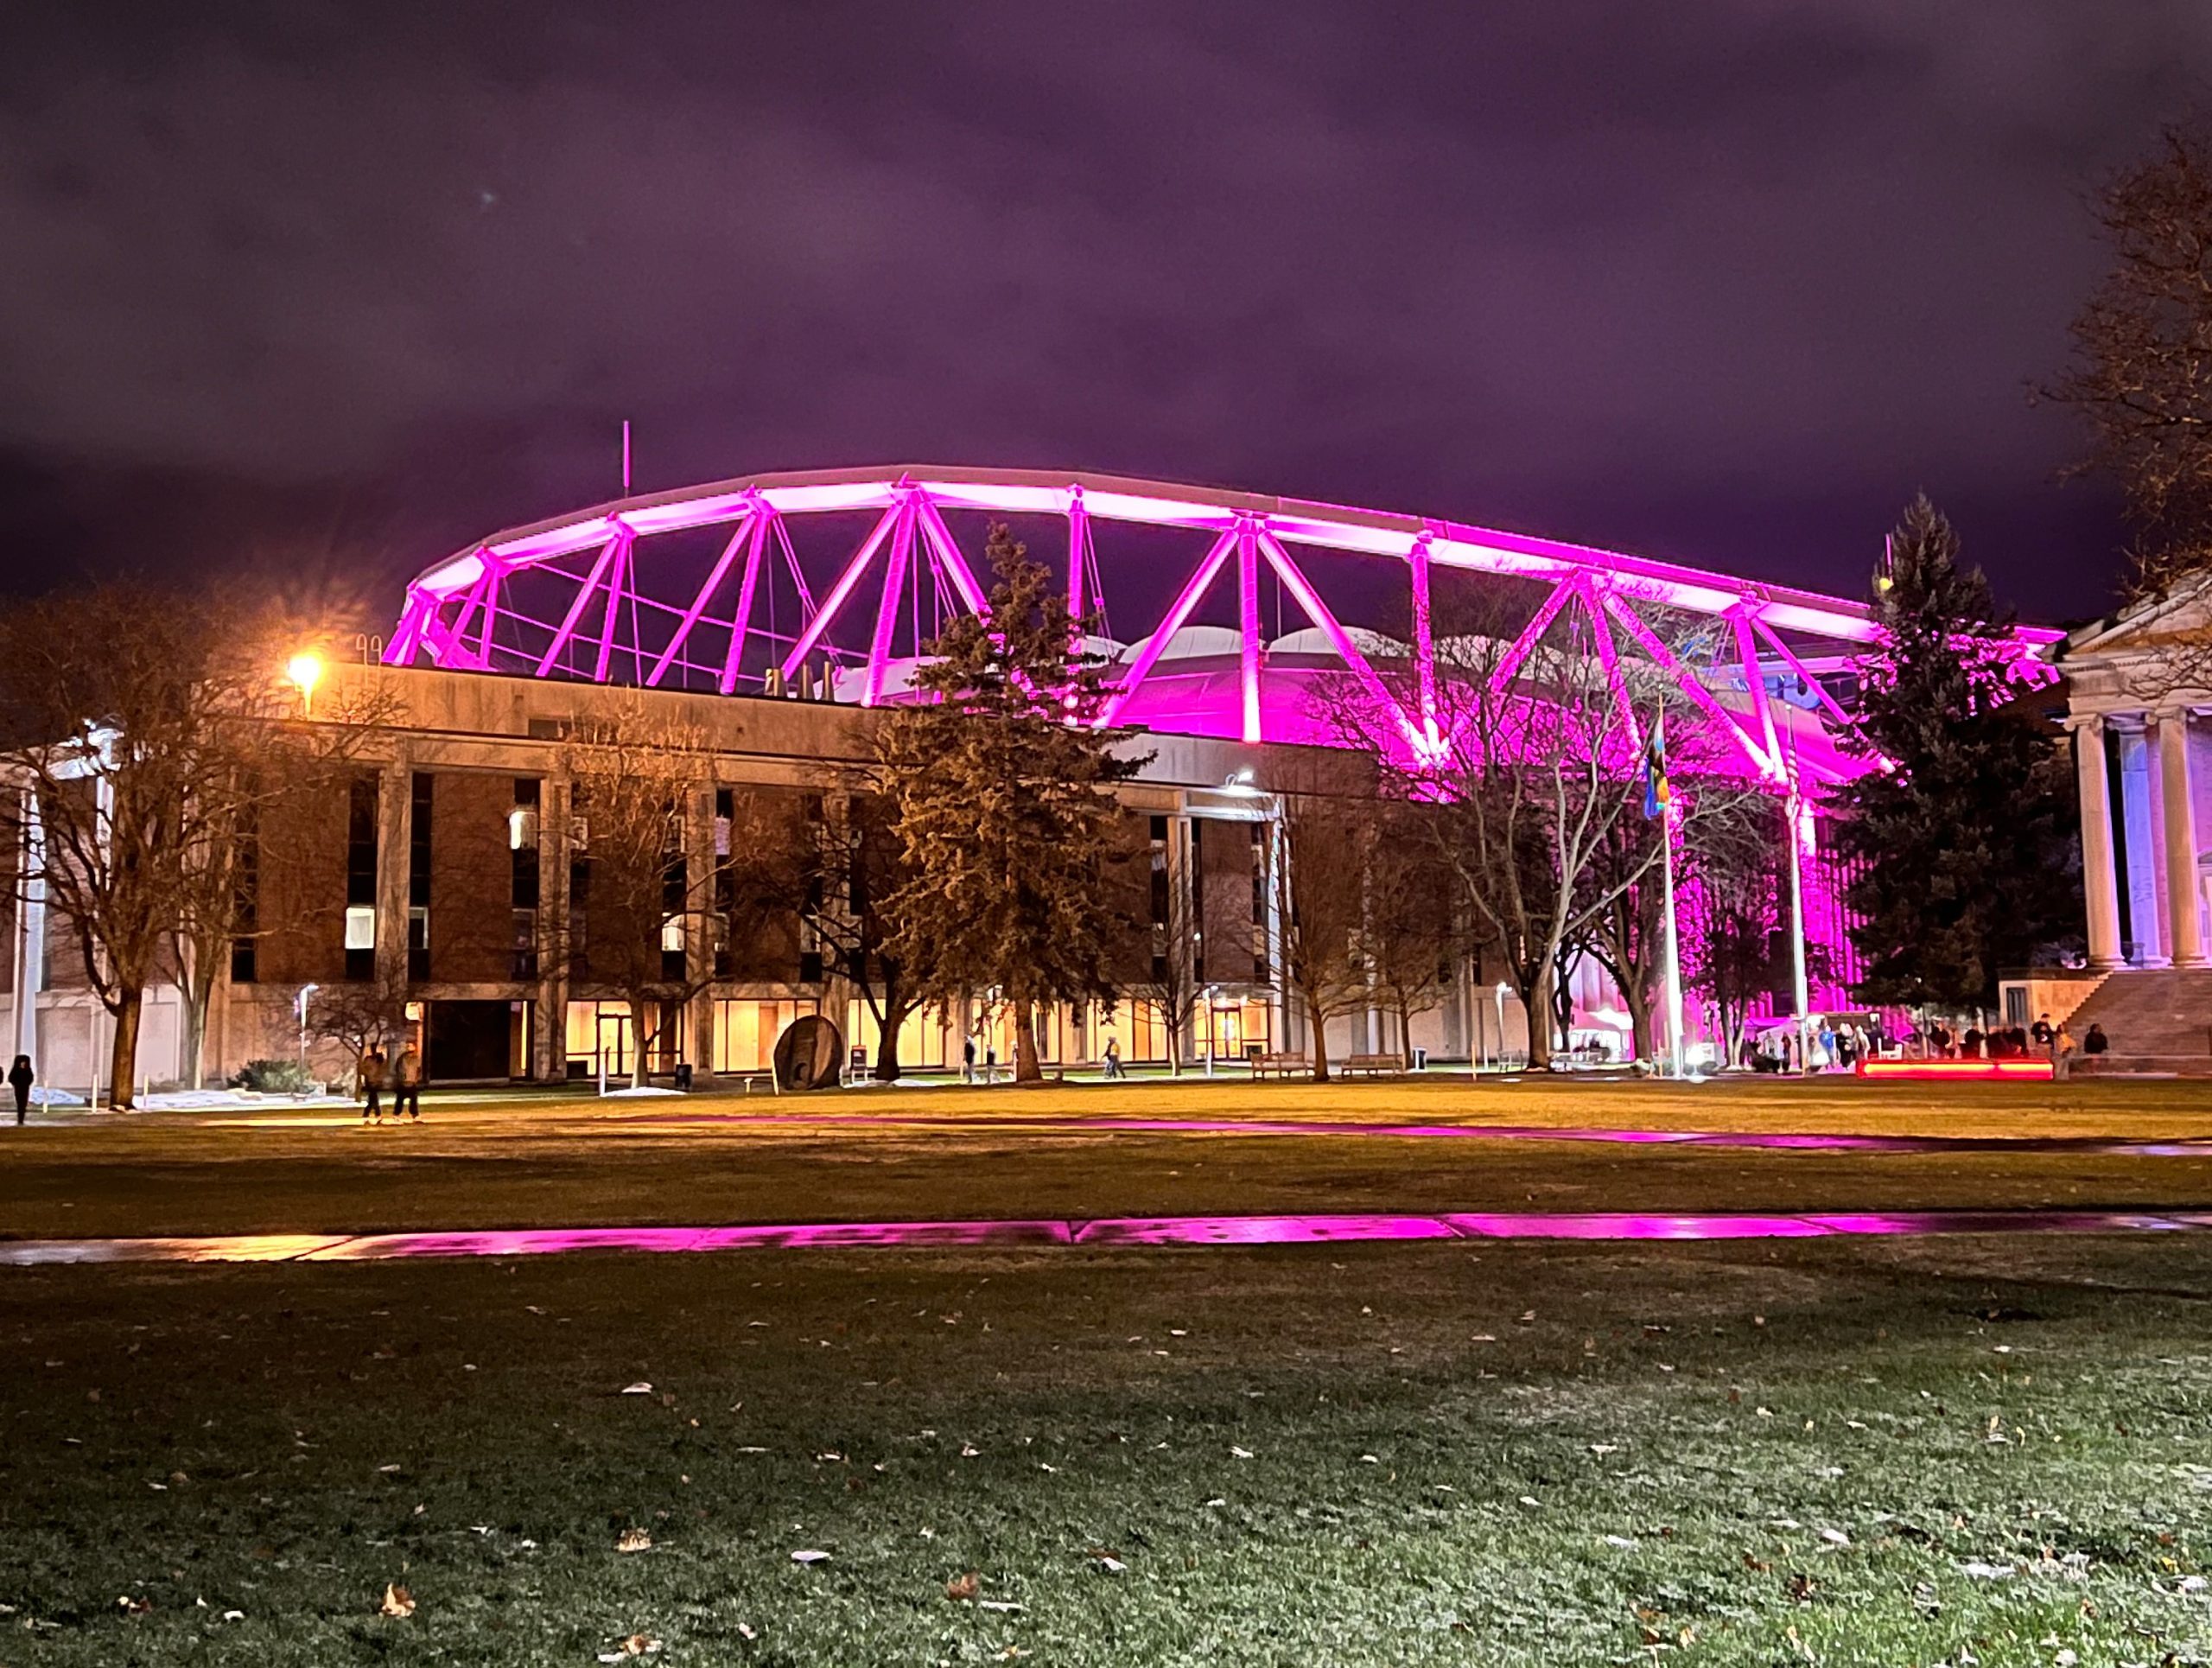 View of the Dome from the Quad lit up in pink